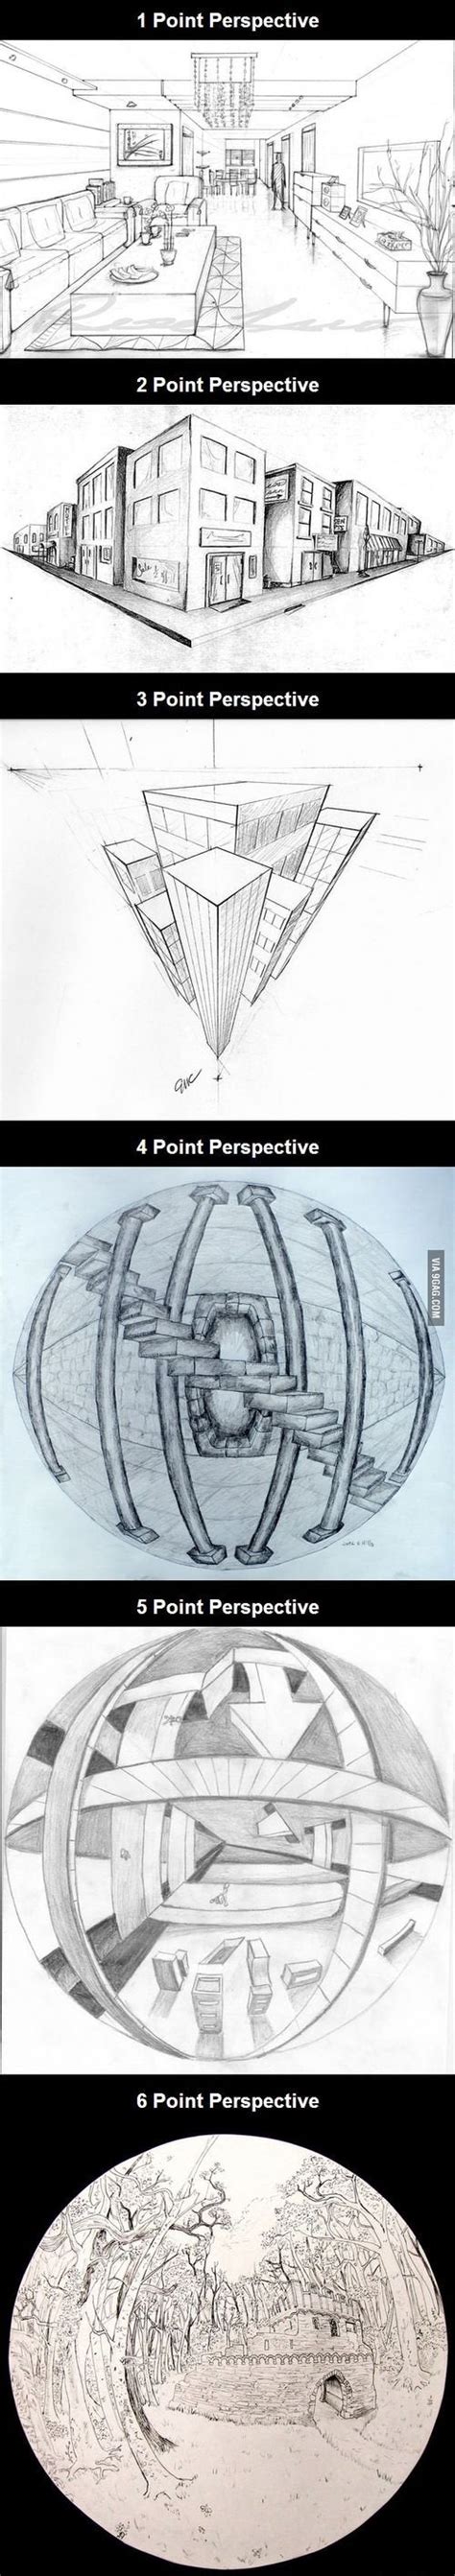 1 6 Point Perspective Rwoahdude